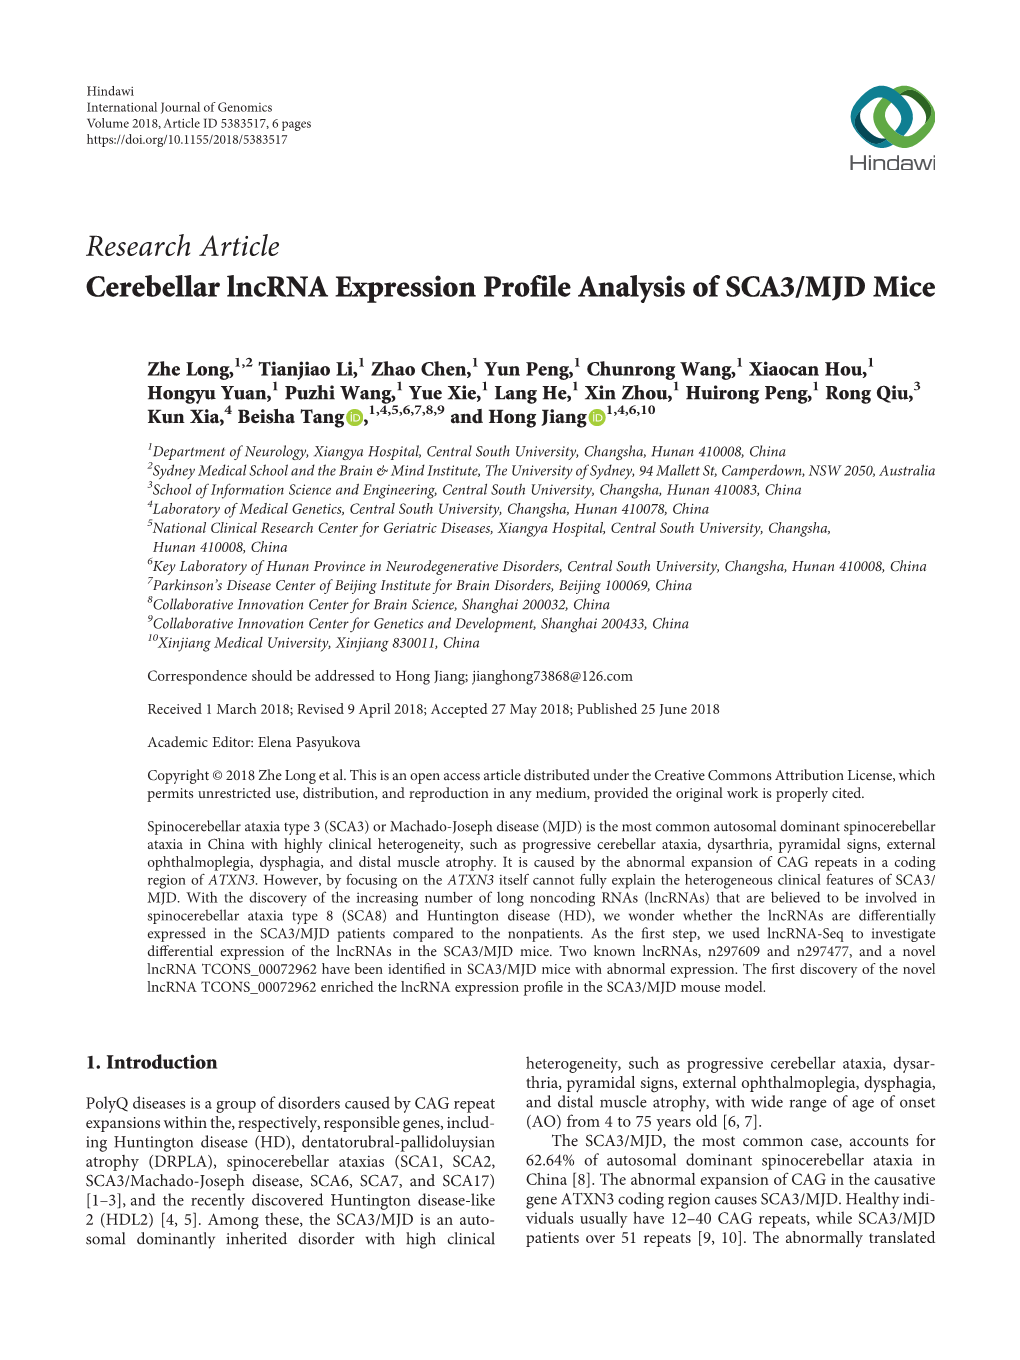 Research Article Cerebellar Lncrna Expression Profile Analysis of SCA3/MJD Mice